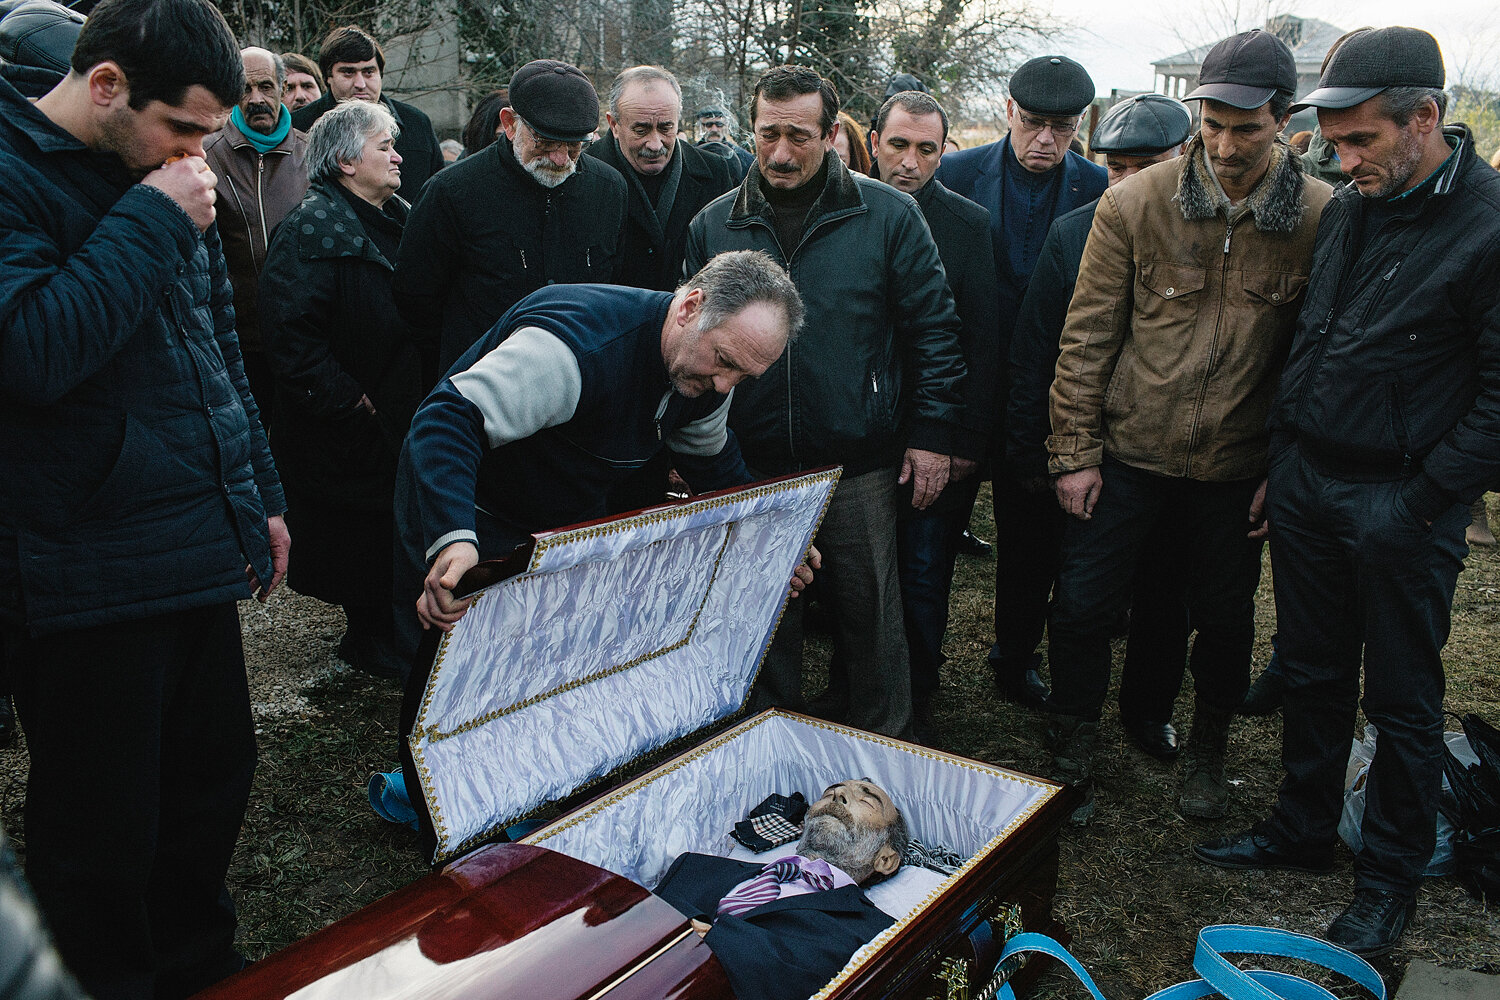  Abkhazia, Ldzaa village, 17/01/2016. The funeral of Otar Hunzaria, one of the most famous Abkhazian folk artist and composer.  